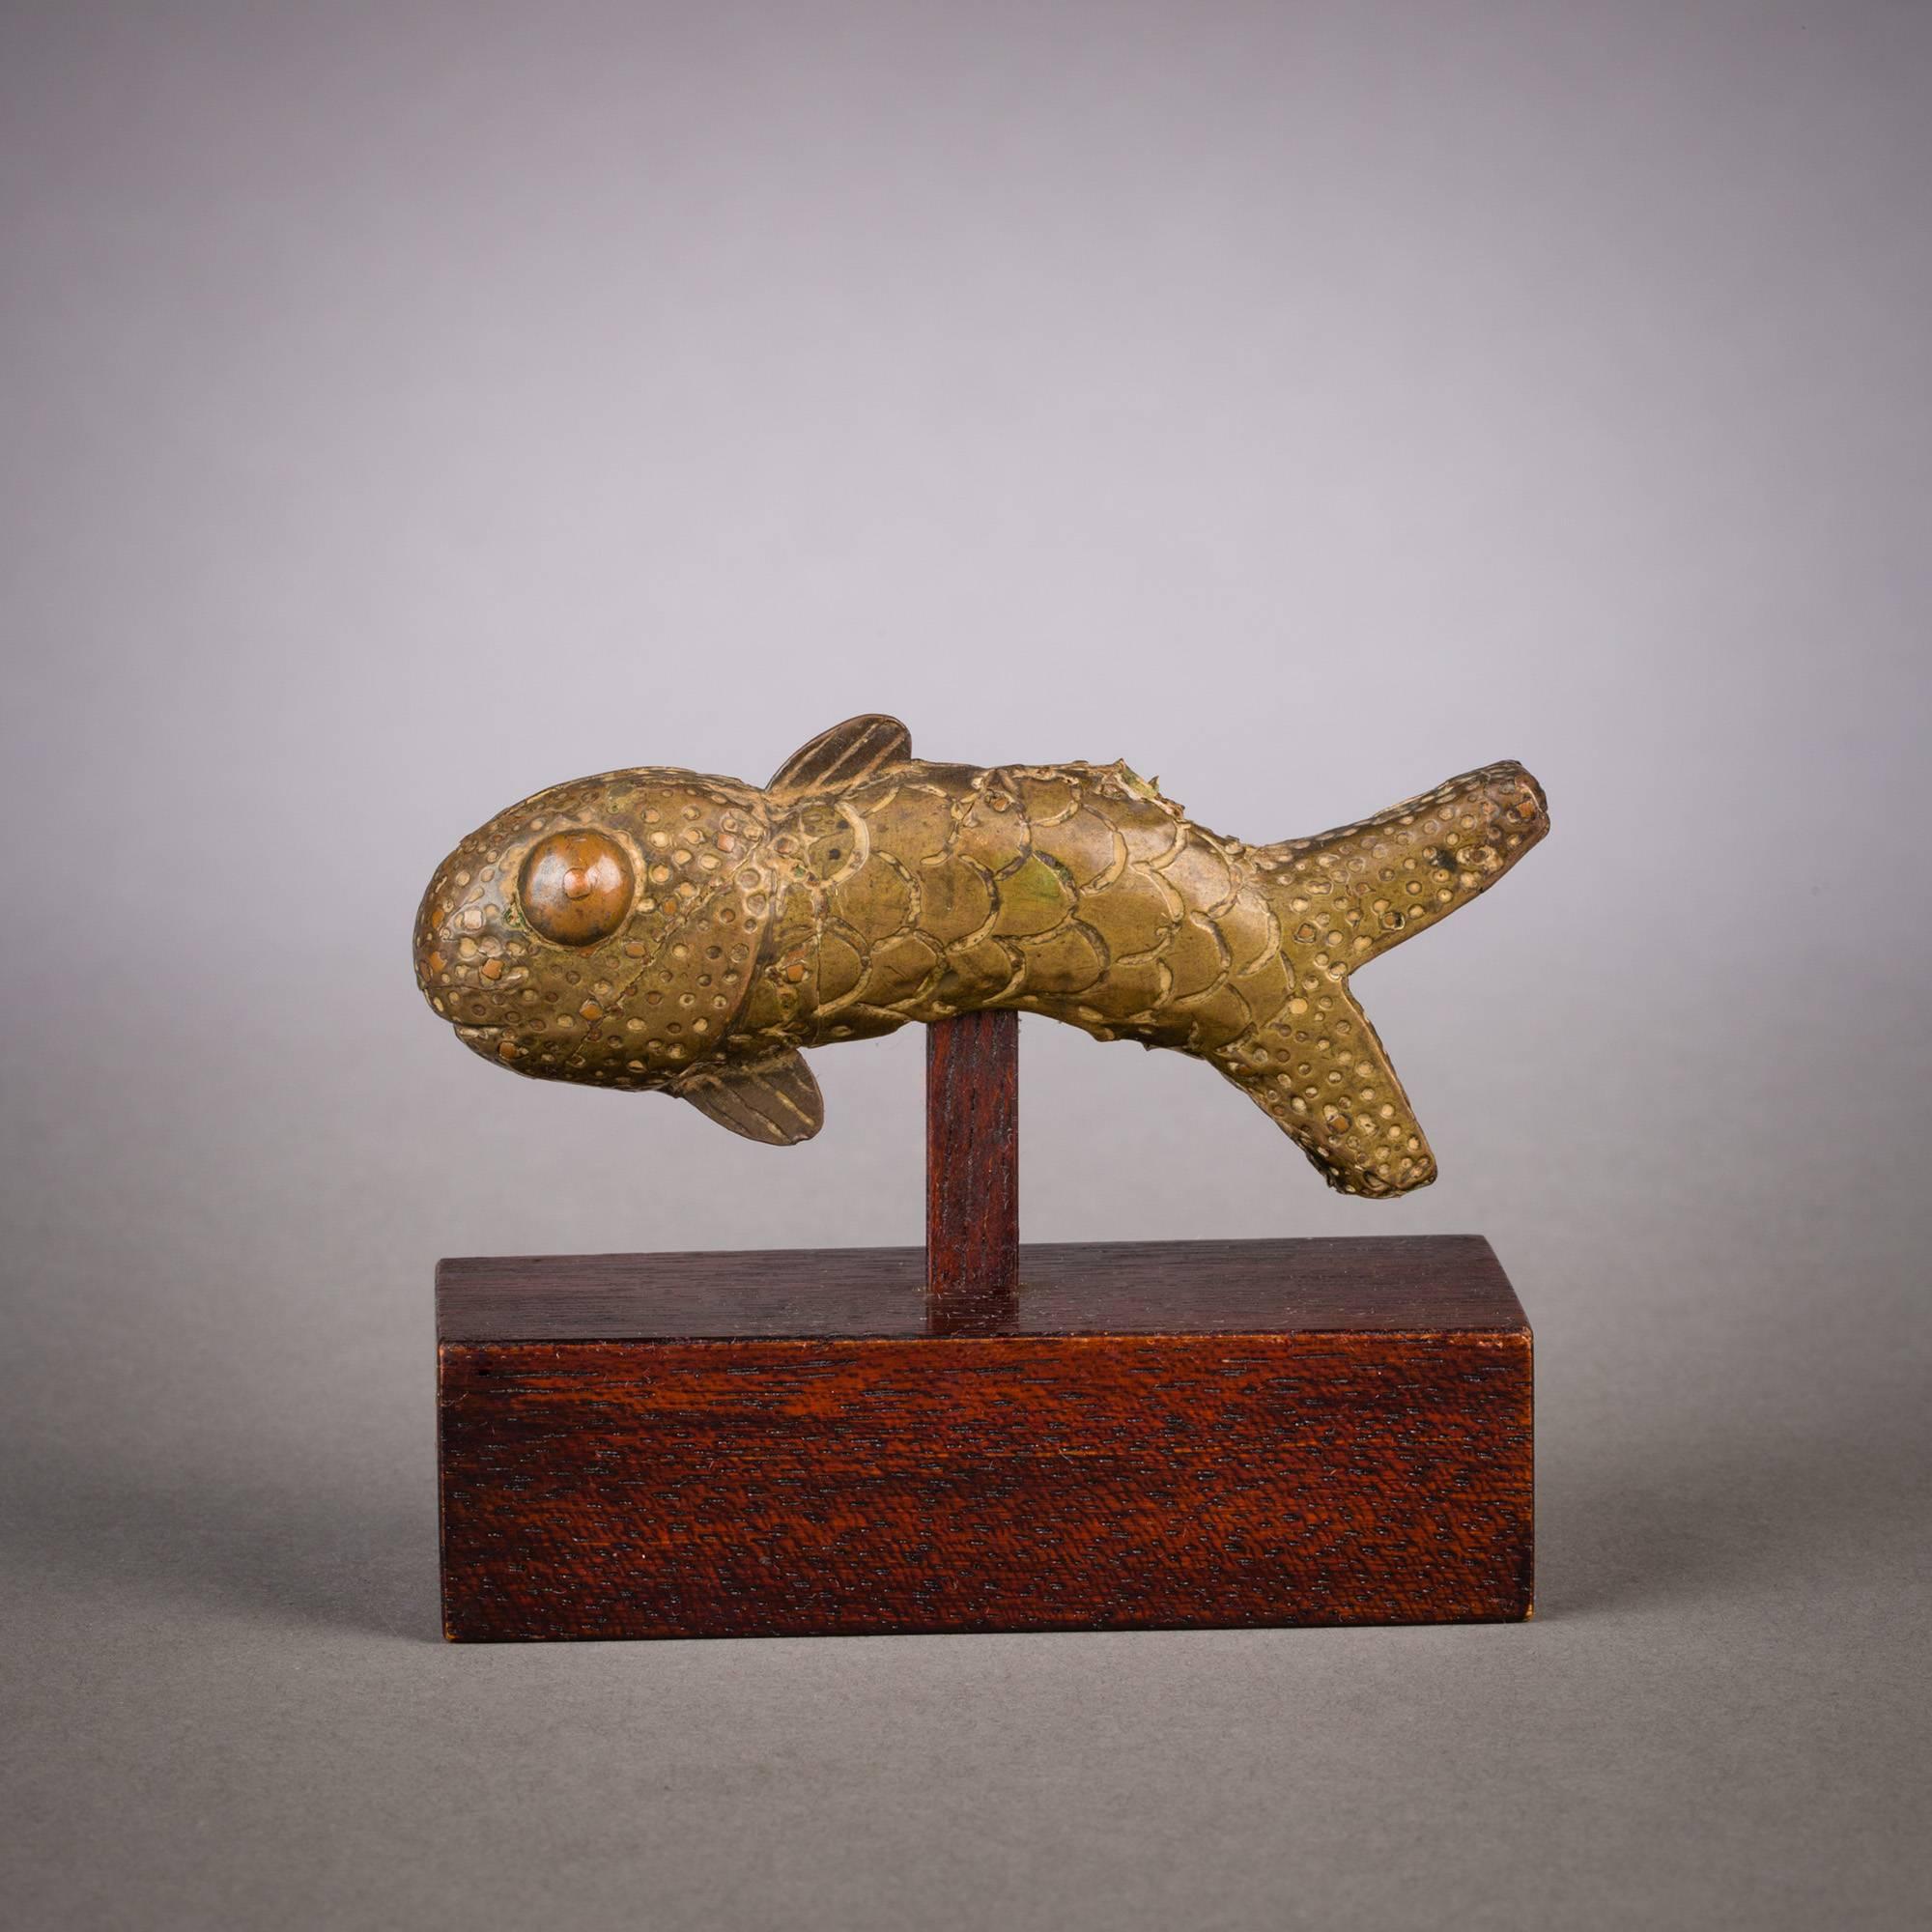 This small piscine figure once served as a finial ornament to a larger work. Close examination reveals a fine range of textural details and patterns that vividly describe the surface. A subtle sinuosity runs through the body, suggesting an almost